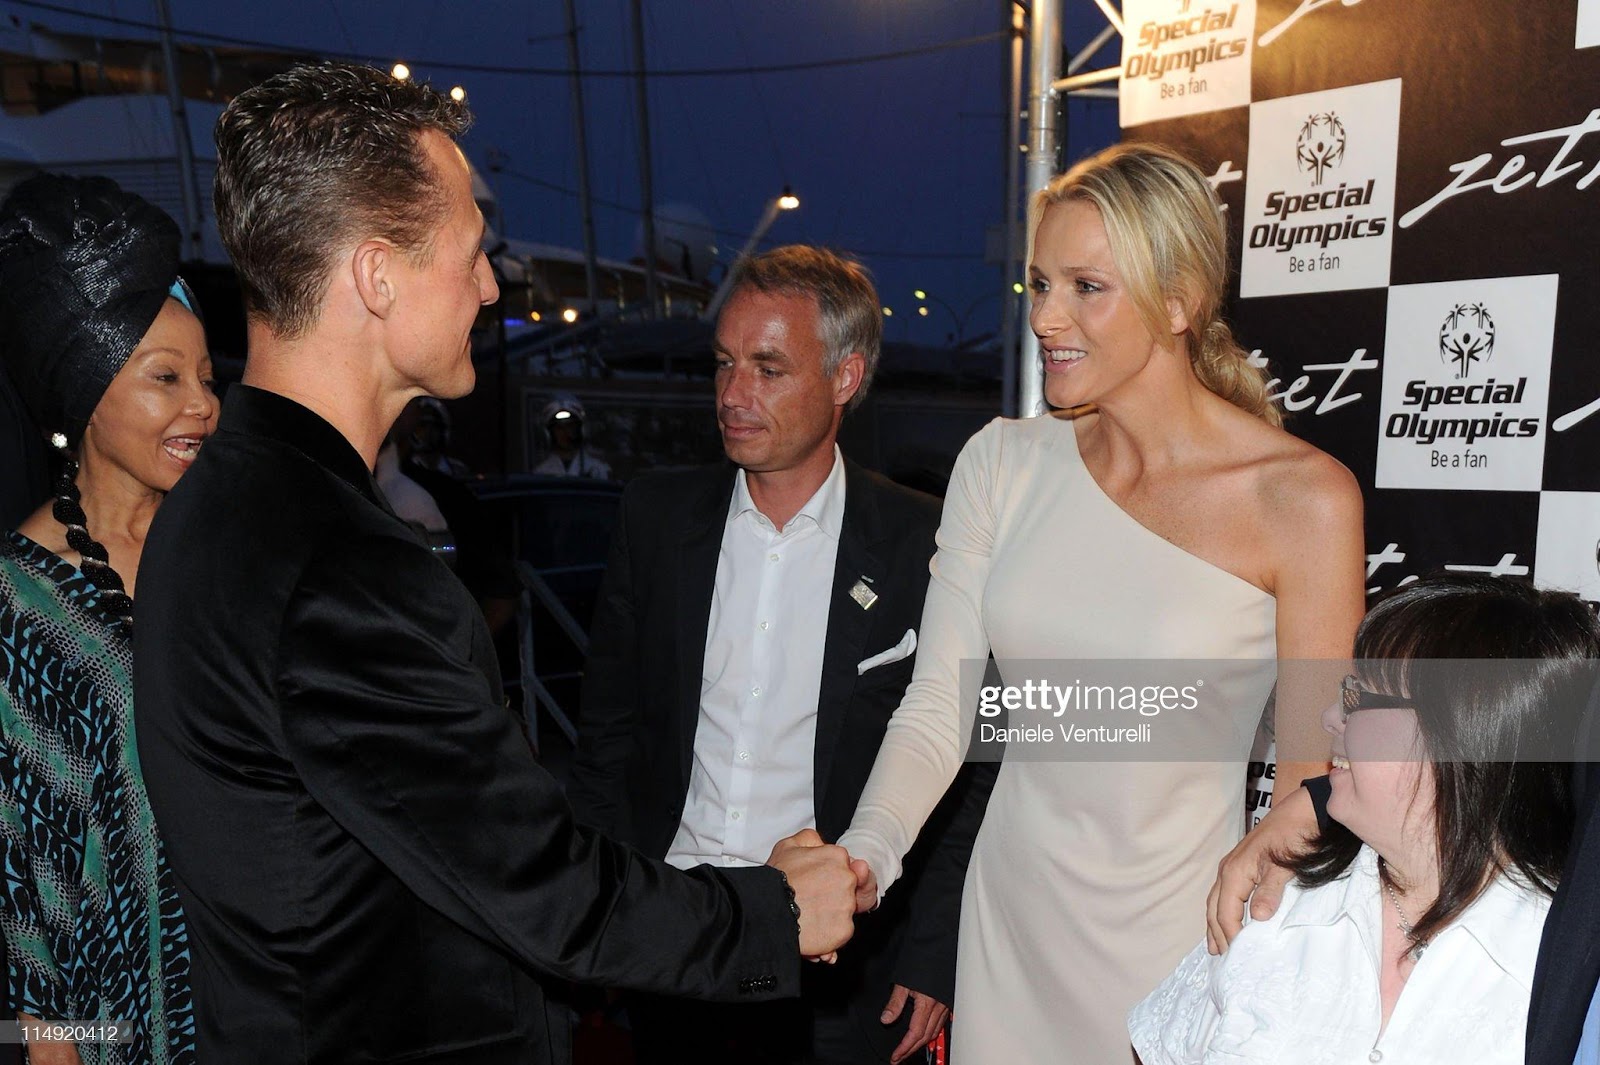 Michael Schumacher and Charlene Wittstock attend the jet set party at the F1 Grand Prix of Monaco on May 28, 2011.